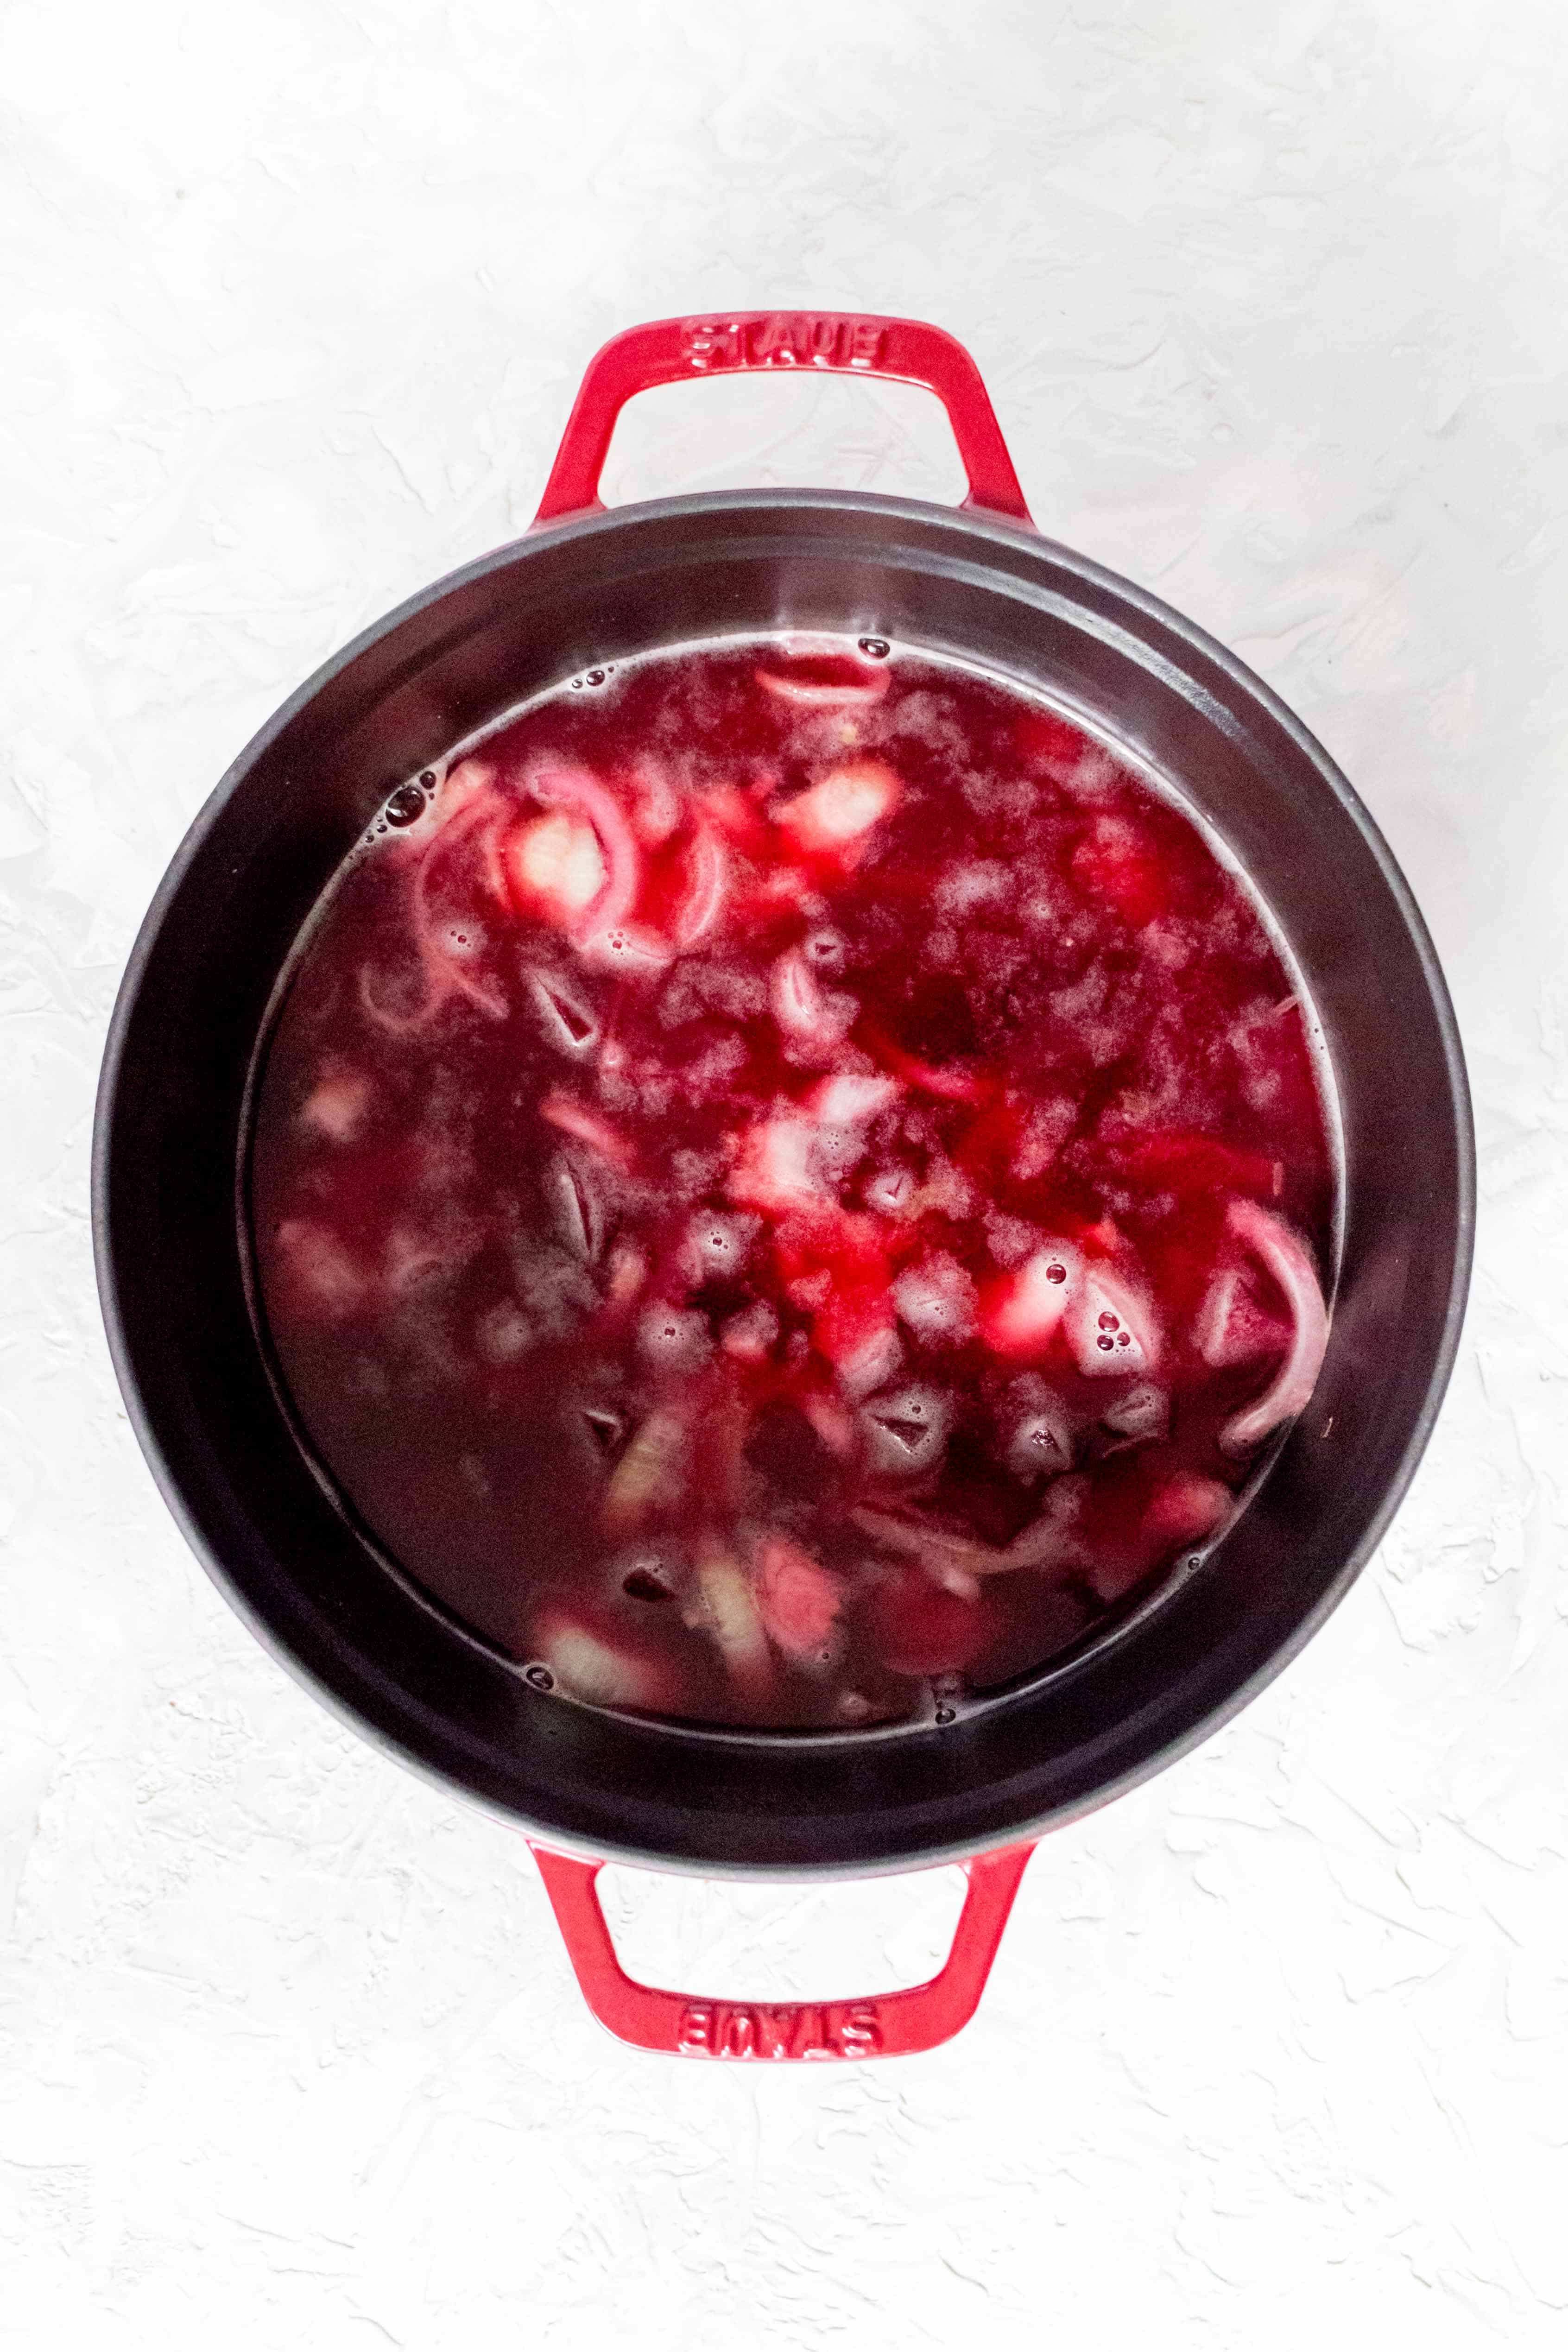 beet soup | Bring the pot to a boil, and let simmer for 5-10 minutes. If you are using raw beets, let the soup simmer until the beets have cooked through.